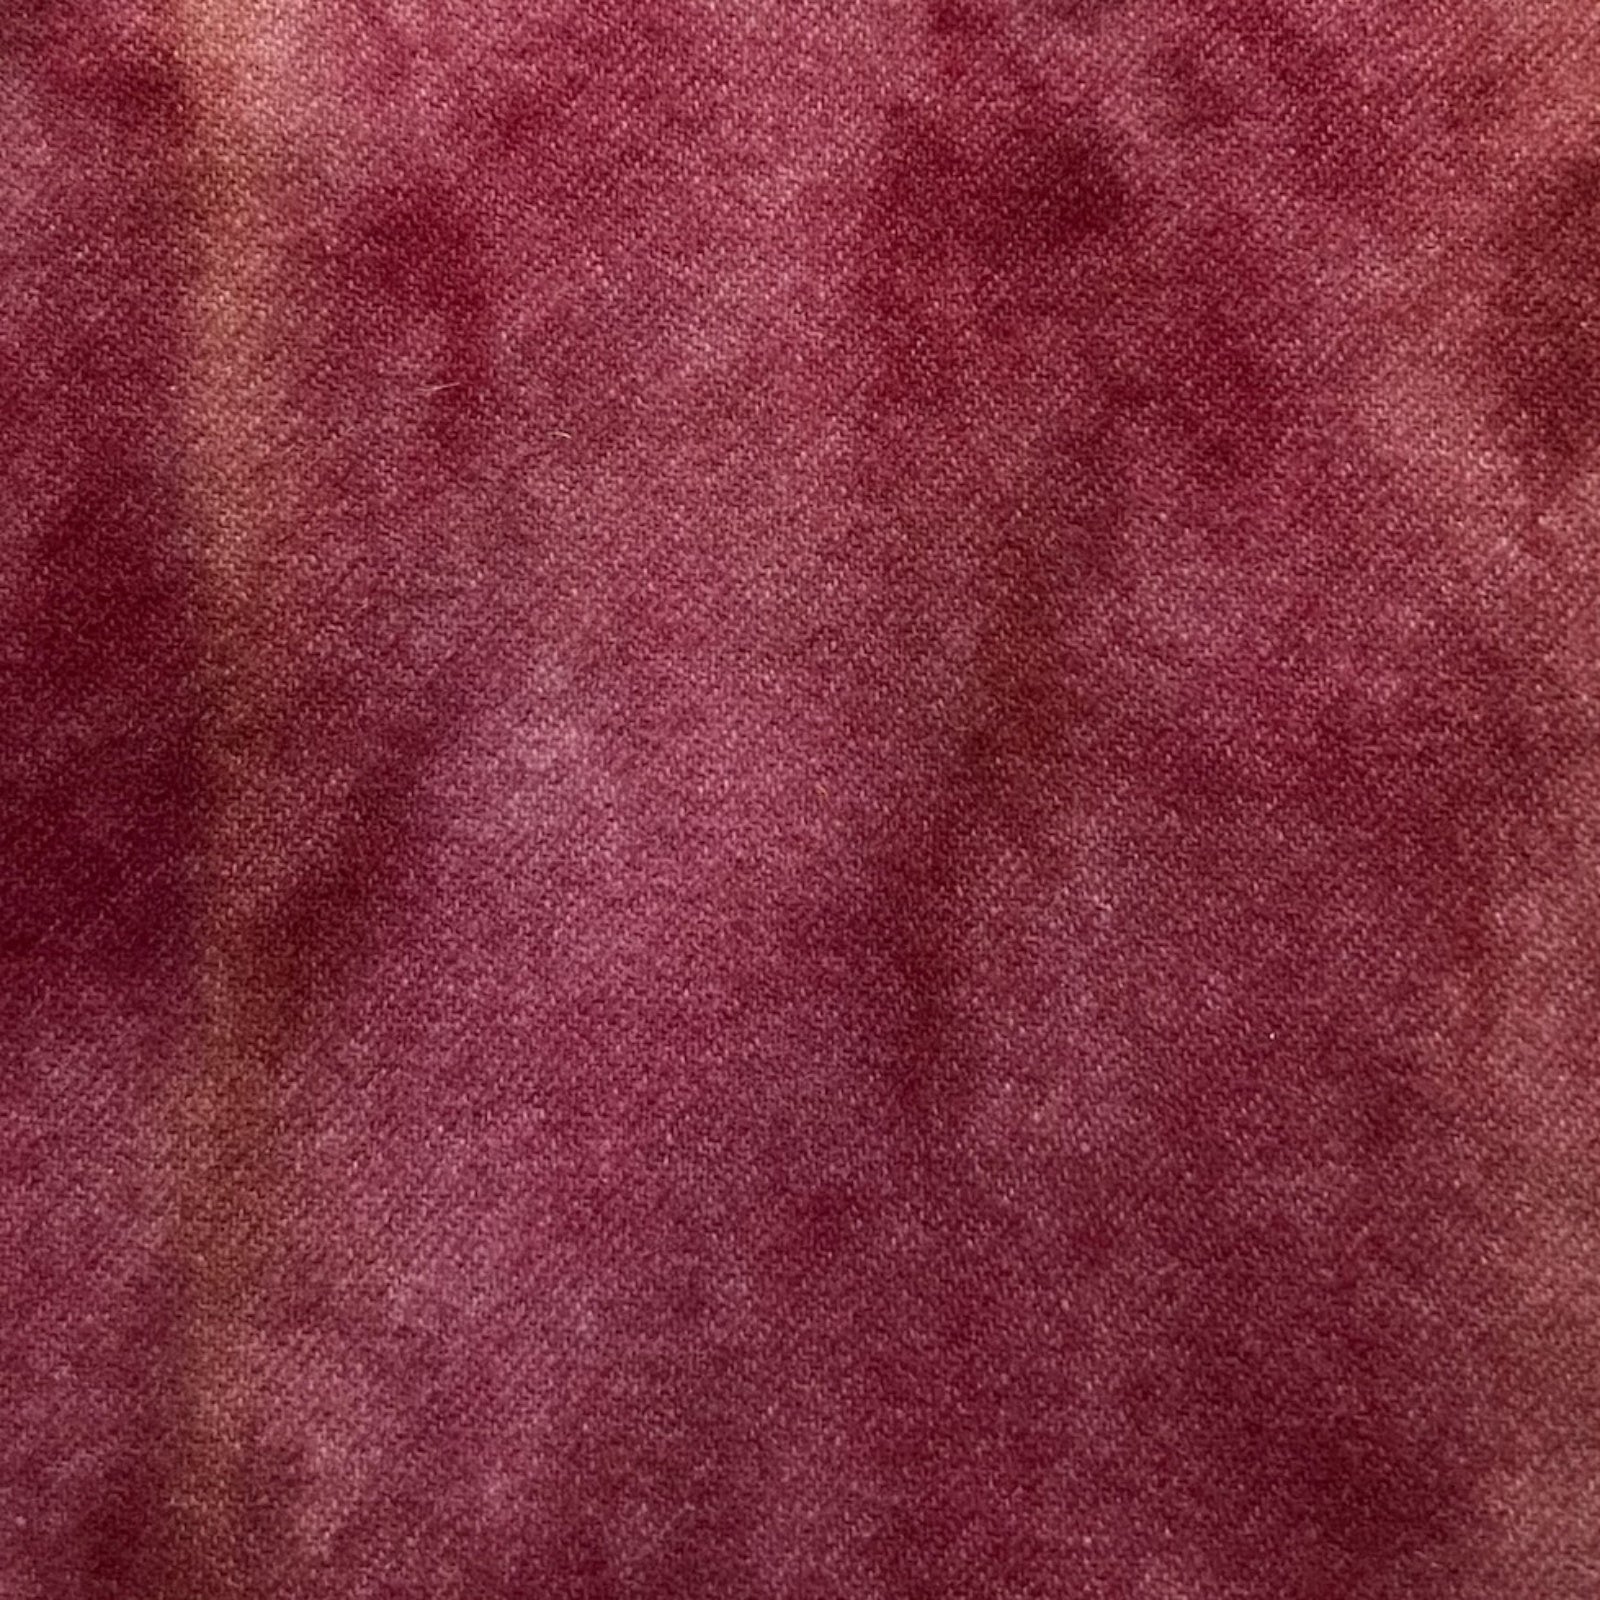 Red Clover - Colorama Hand Dyed Wool - Offered by HoneyBee Hive Rug Hooking